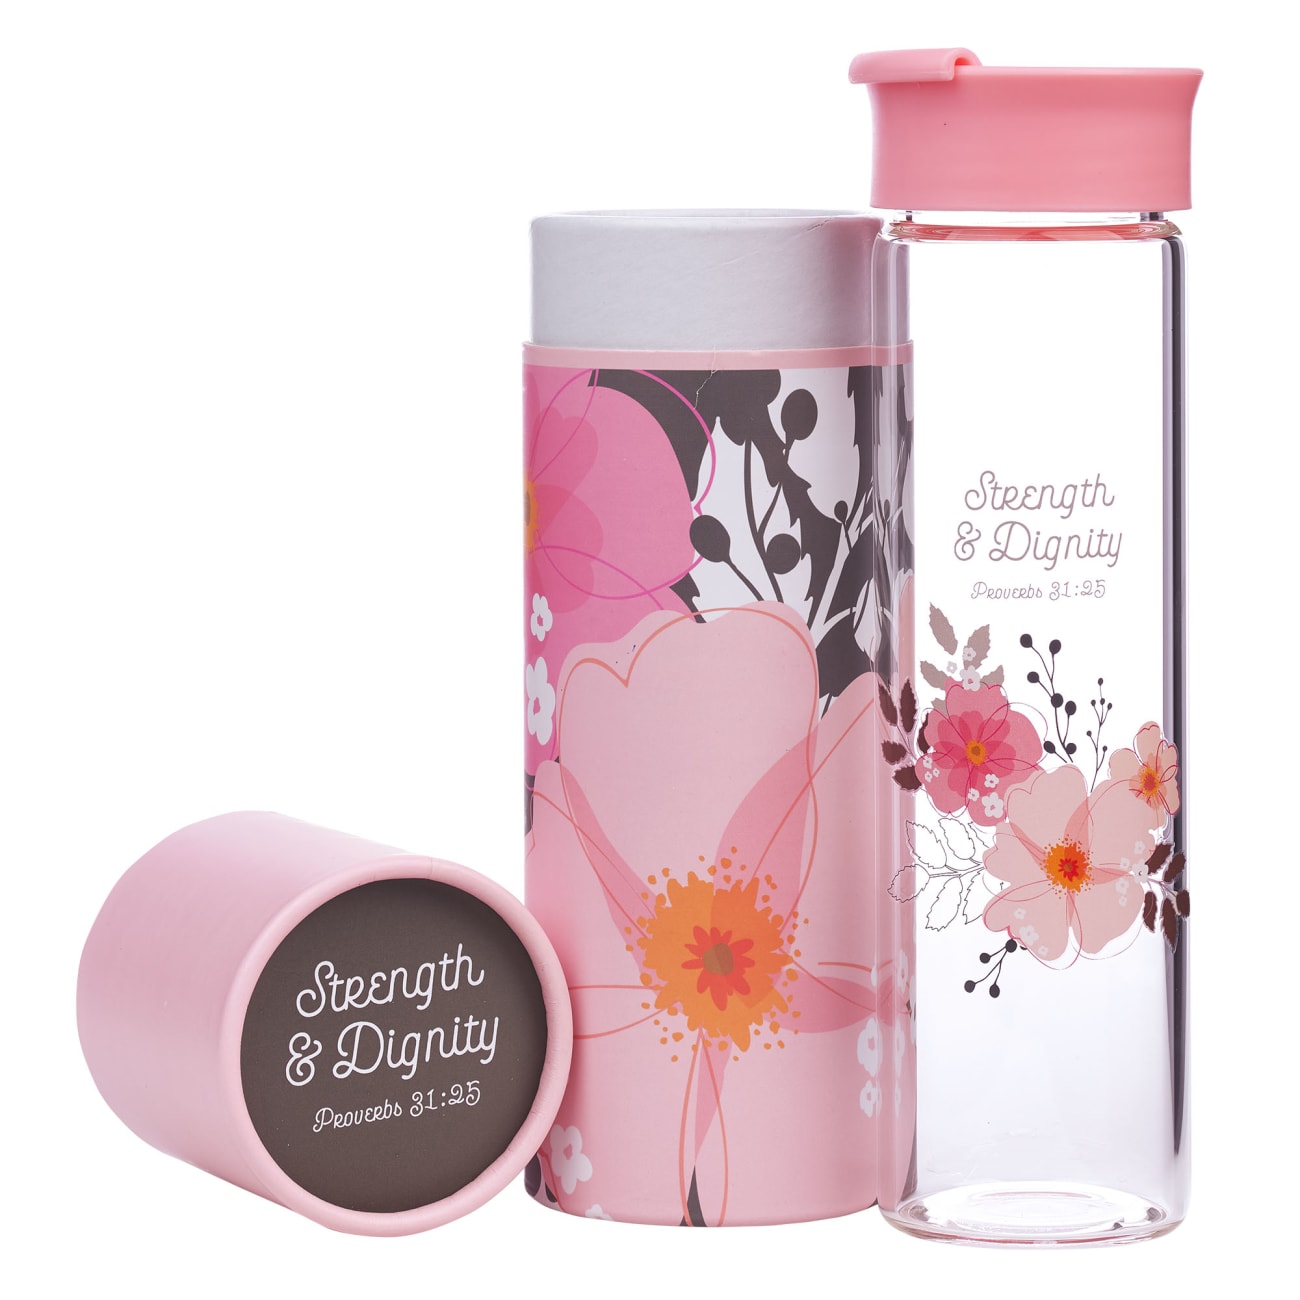 Water Bottle Clear Glass: Strength & Dignity, Pink Flowers (Proverbs 31:25) Homeware